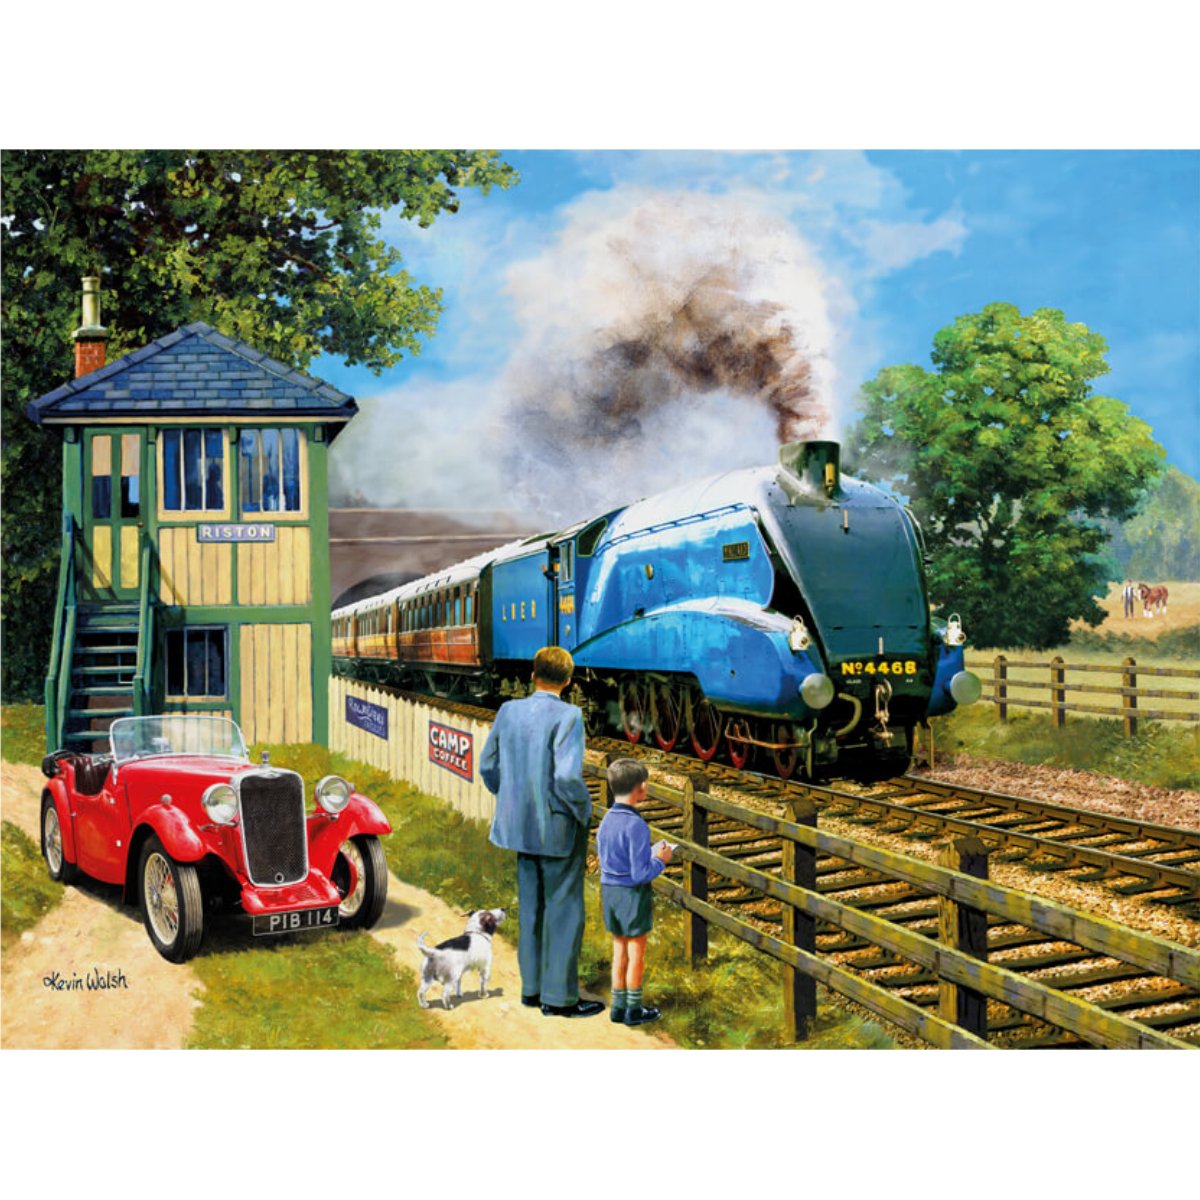 Built For Speed - Kevin Walsh 1000 Piece Jigsaw Puzzle - Phillips Hobbies